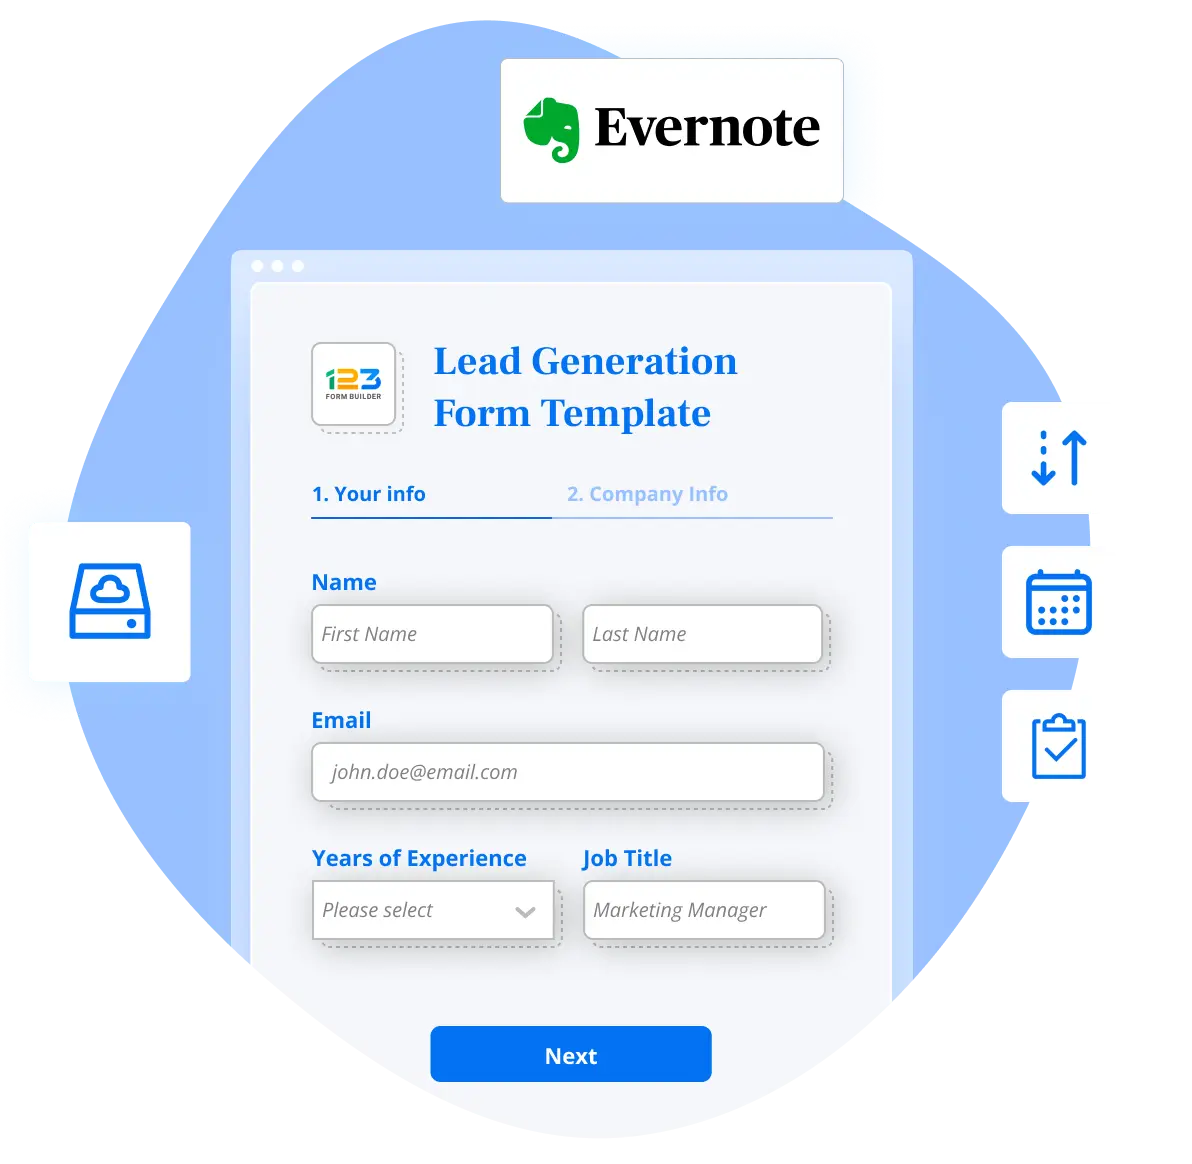 Image showing 123FormBuilder and Evernote integration with multiple use-cases like automatic data transfer, reminders for events and appointments, tasks assignation for your team, and cloud storage.